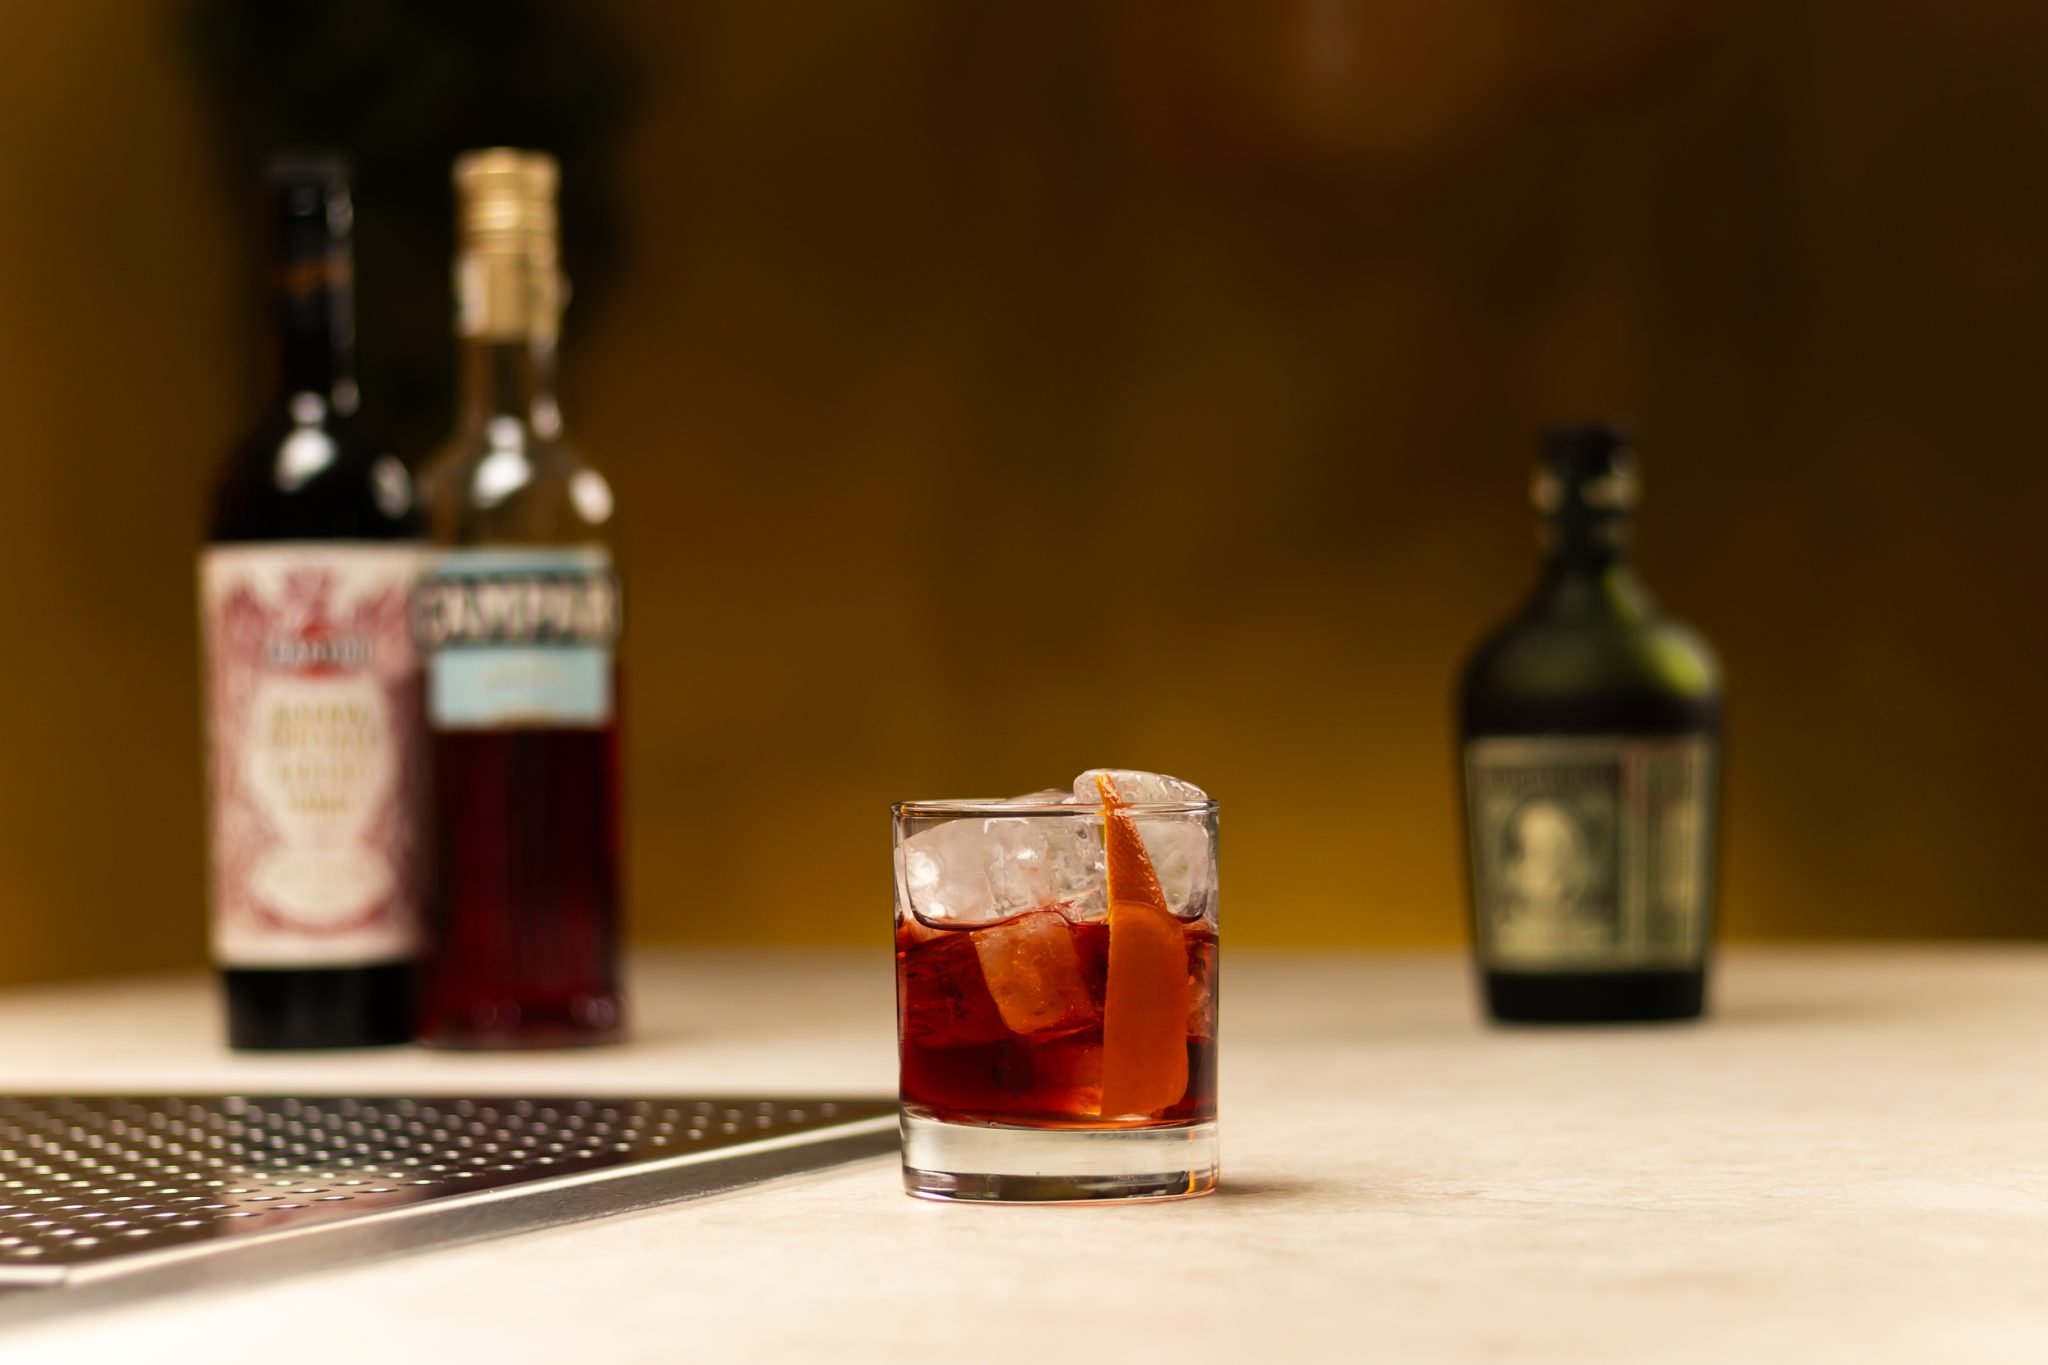 Dark Rum, Campari, and sweet Vermouth laid out on a white bar table